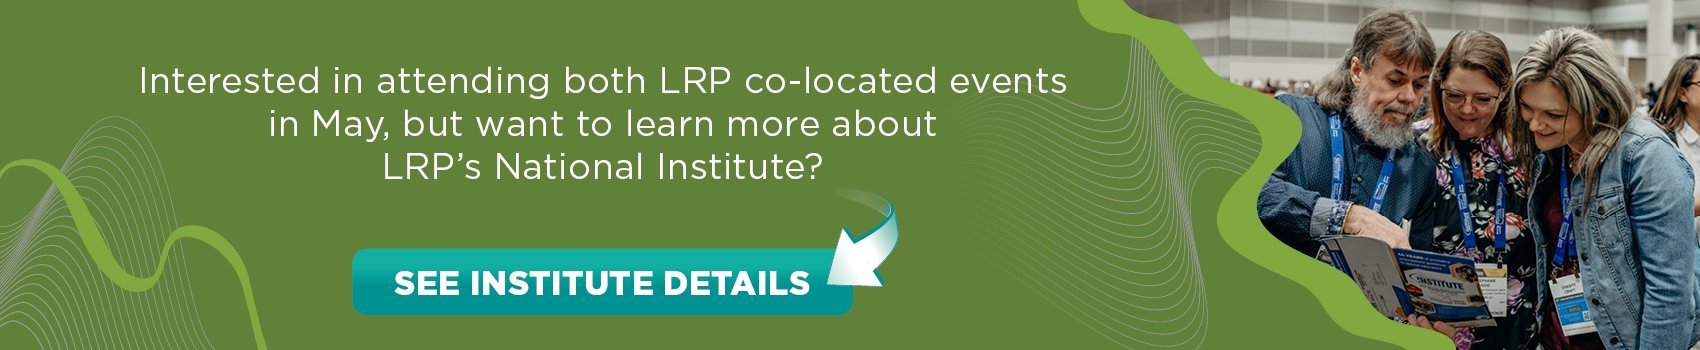 Interested in attending both LRP co-located events? Learn more about LRP’s National Institute? 